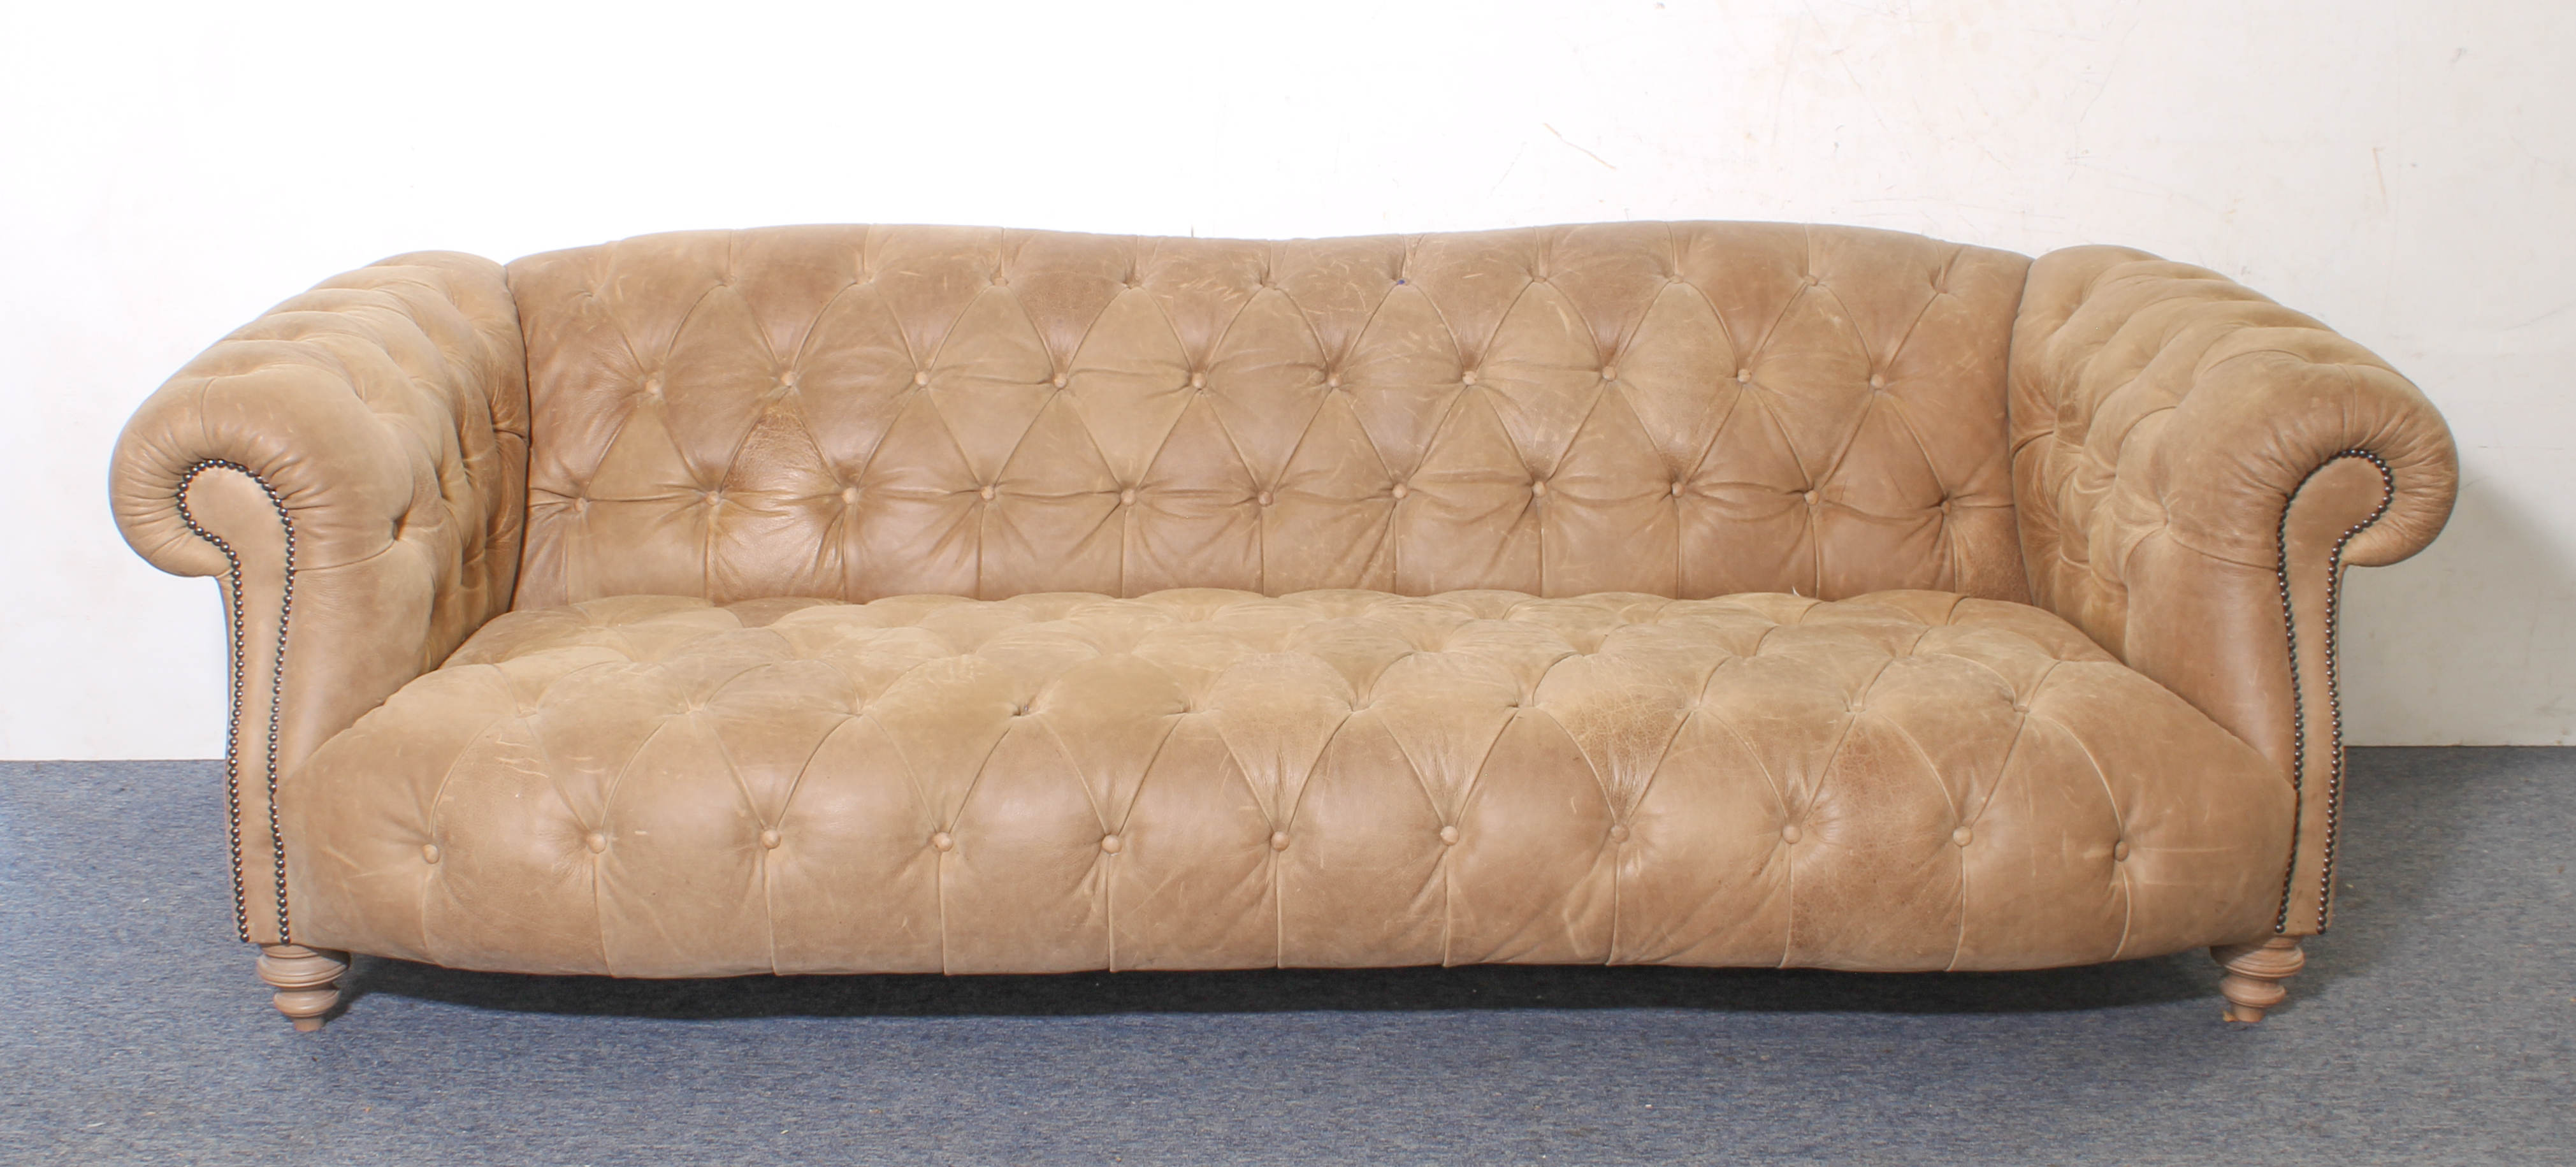 A leather Chesterfield three-seater sofa - modern, in soft pale-brown grained leather, raised on - Image 2 of 4